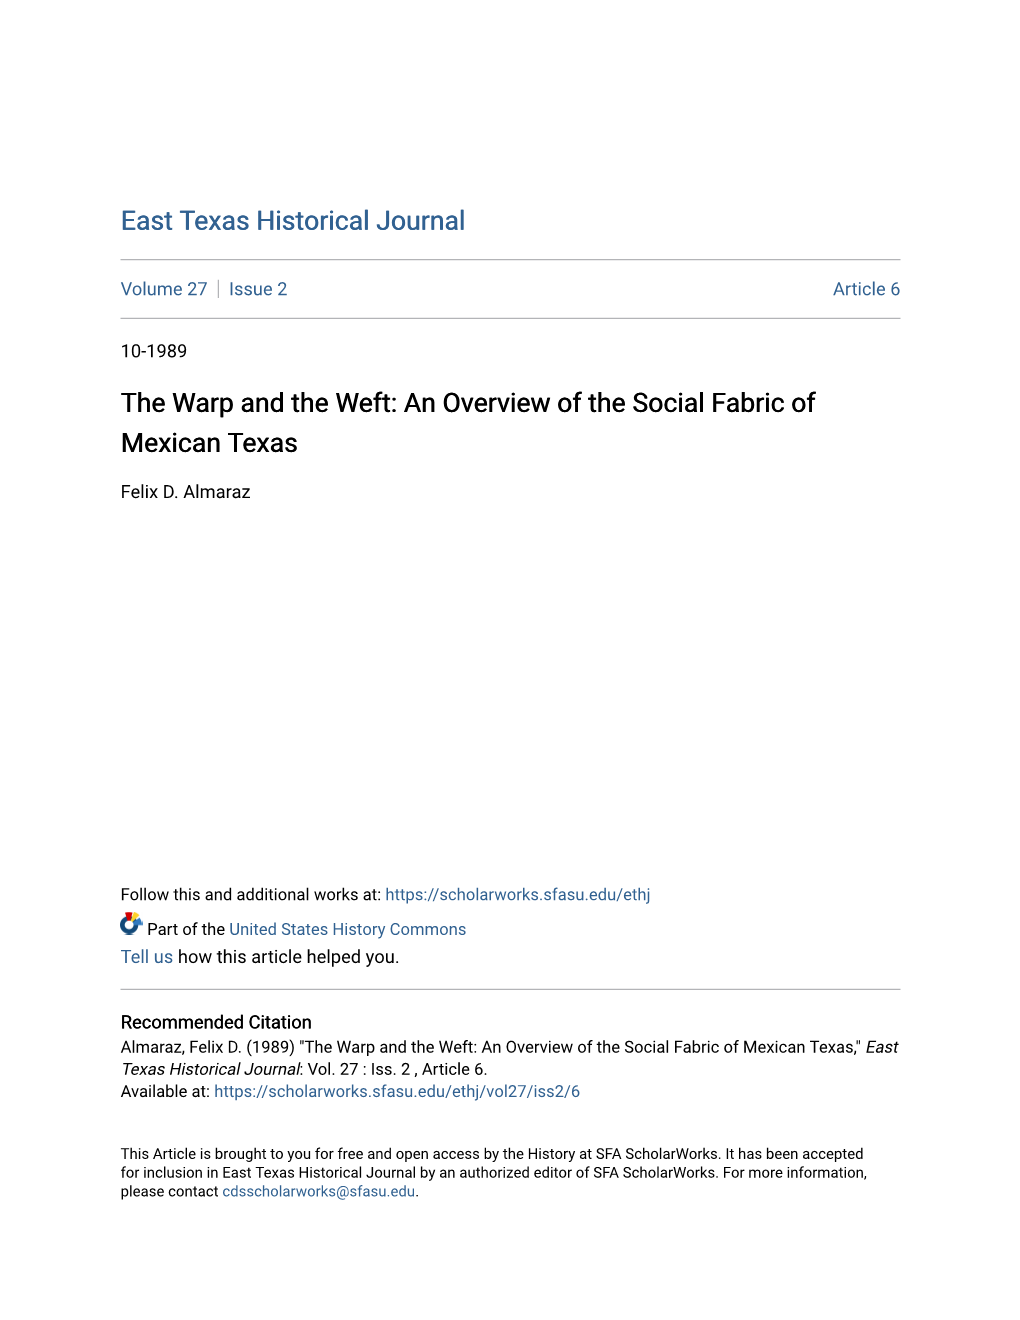 The Warp and the Weft: an Overview of the Social Fabric of Mexican Texas